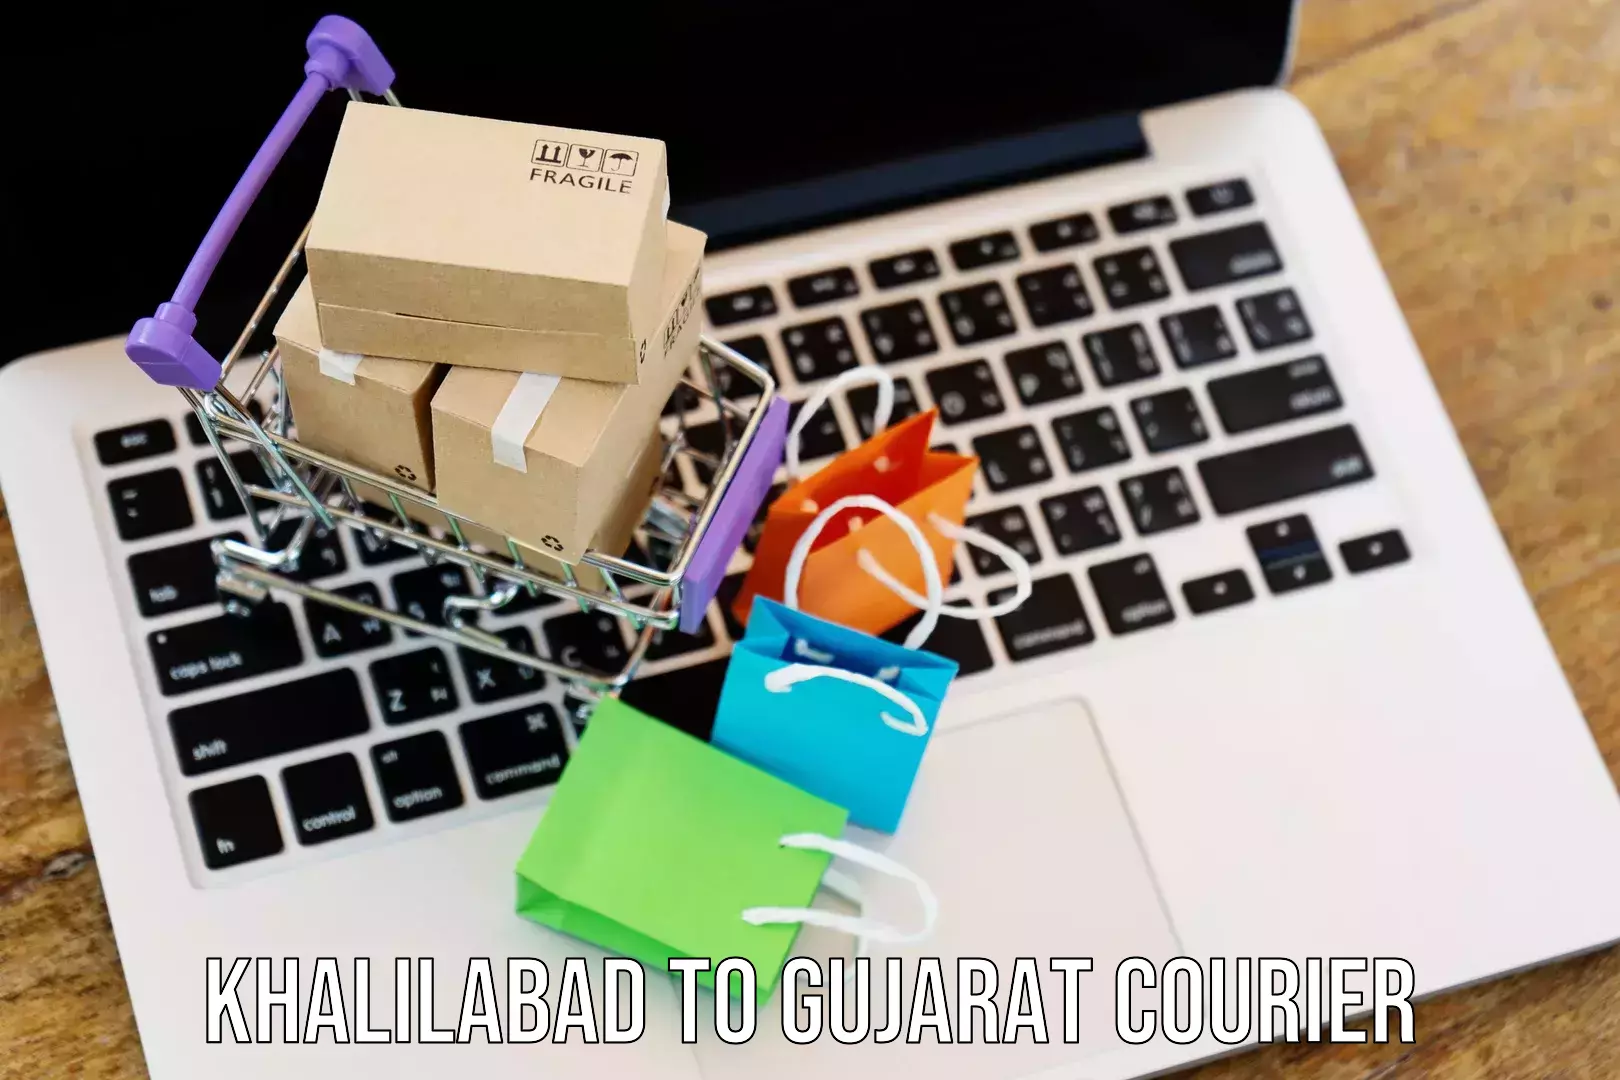 Express delivery capabilities Khalilabad to Gujarat